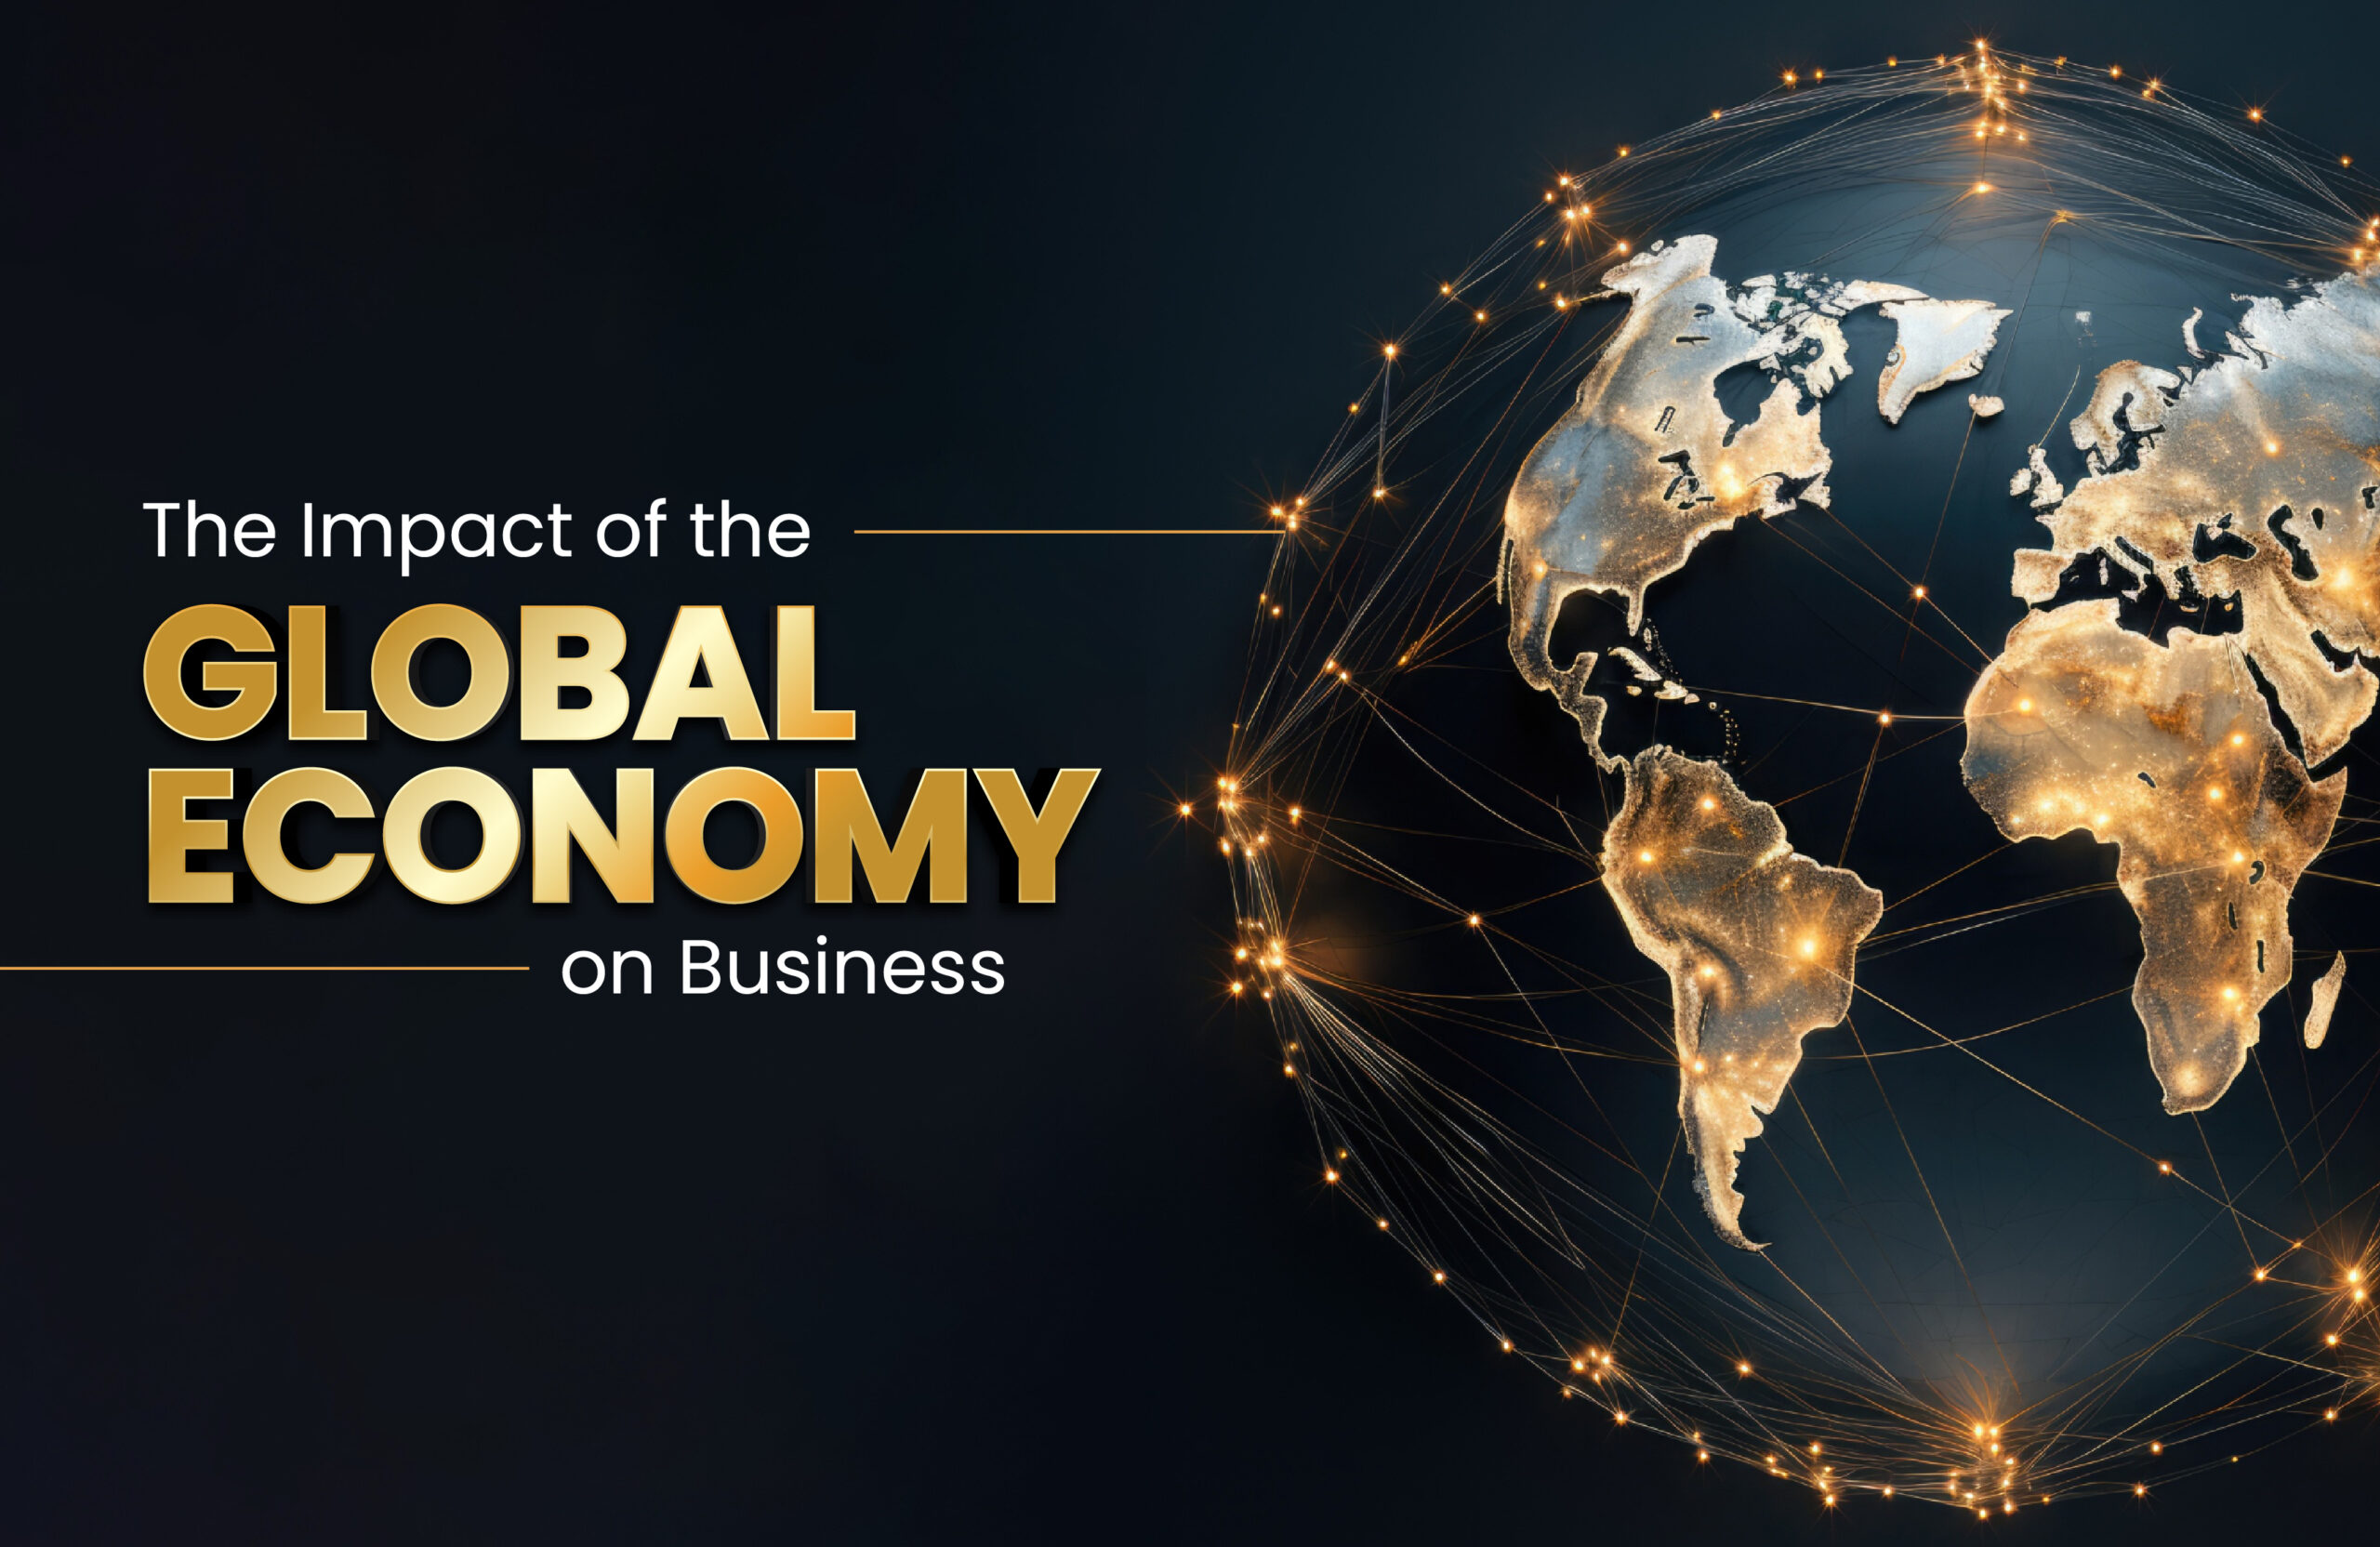 The Impact of the Global Economy on Business